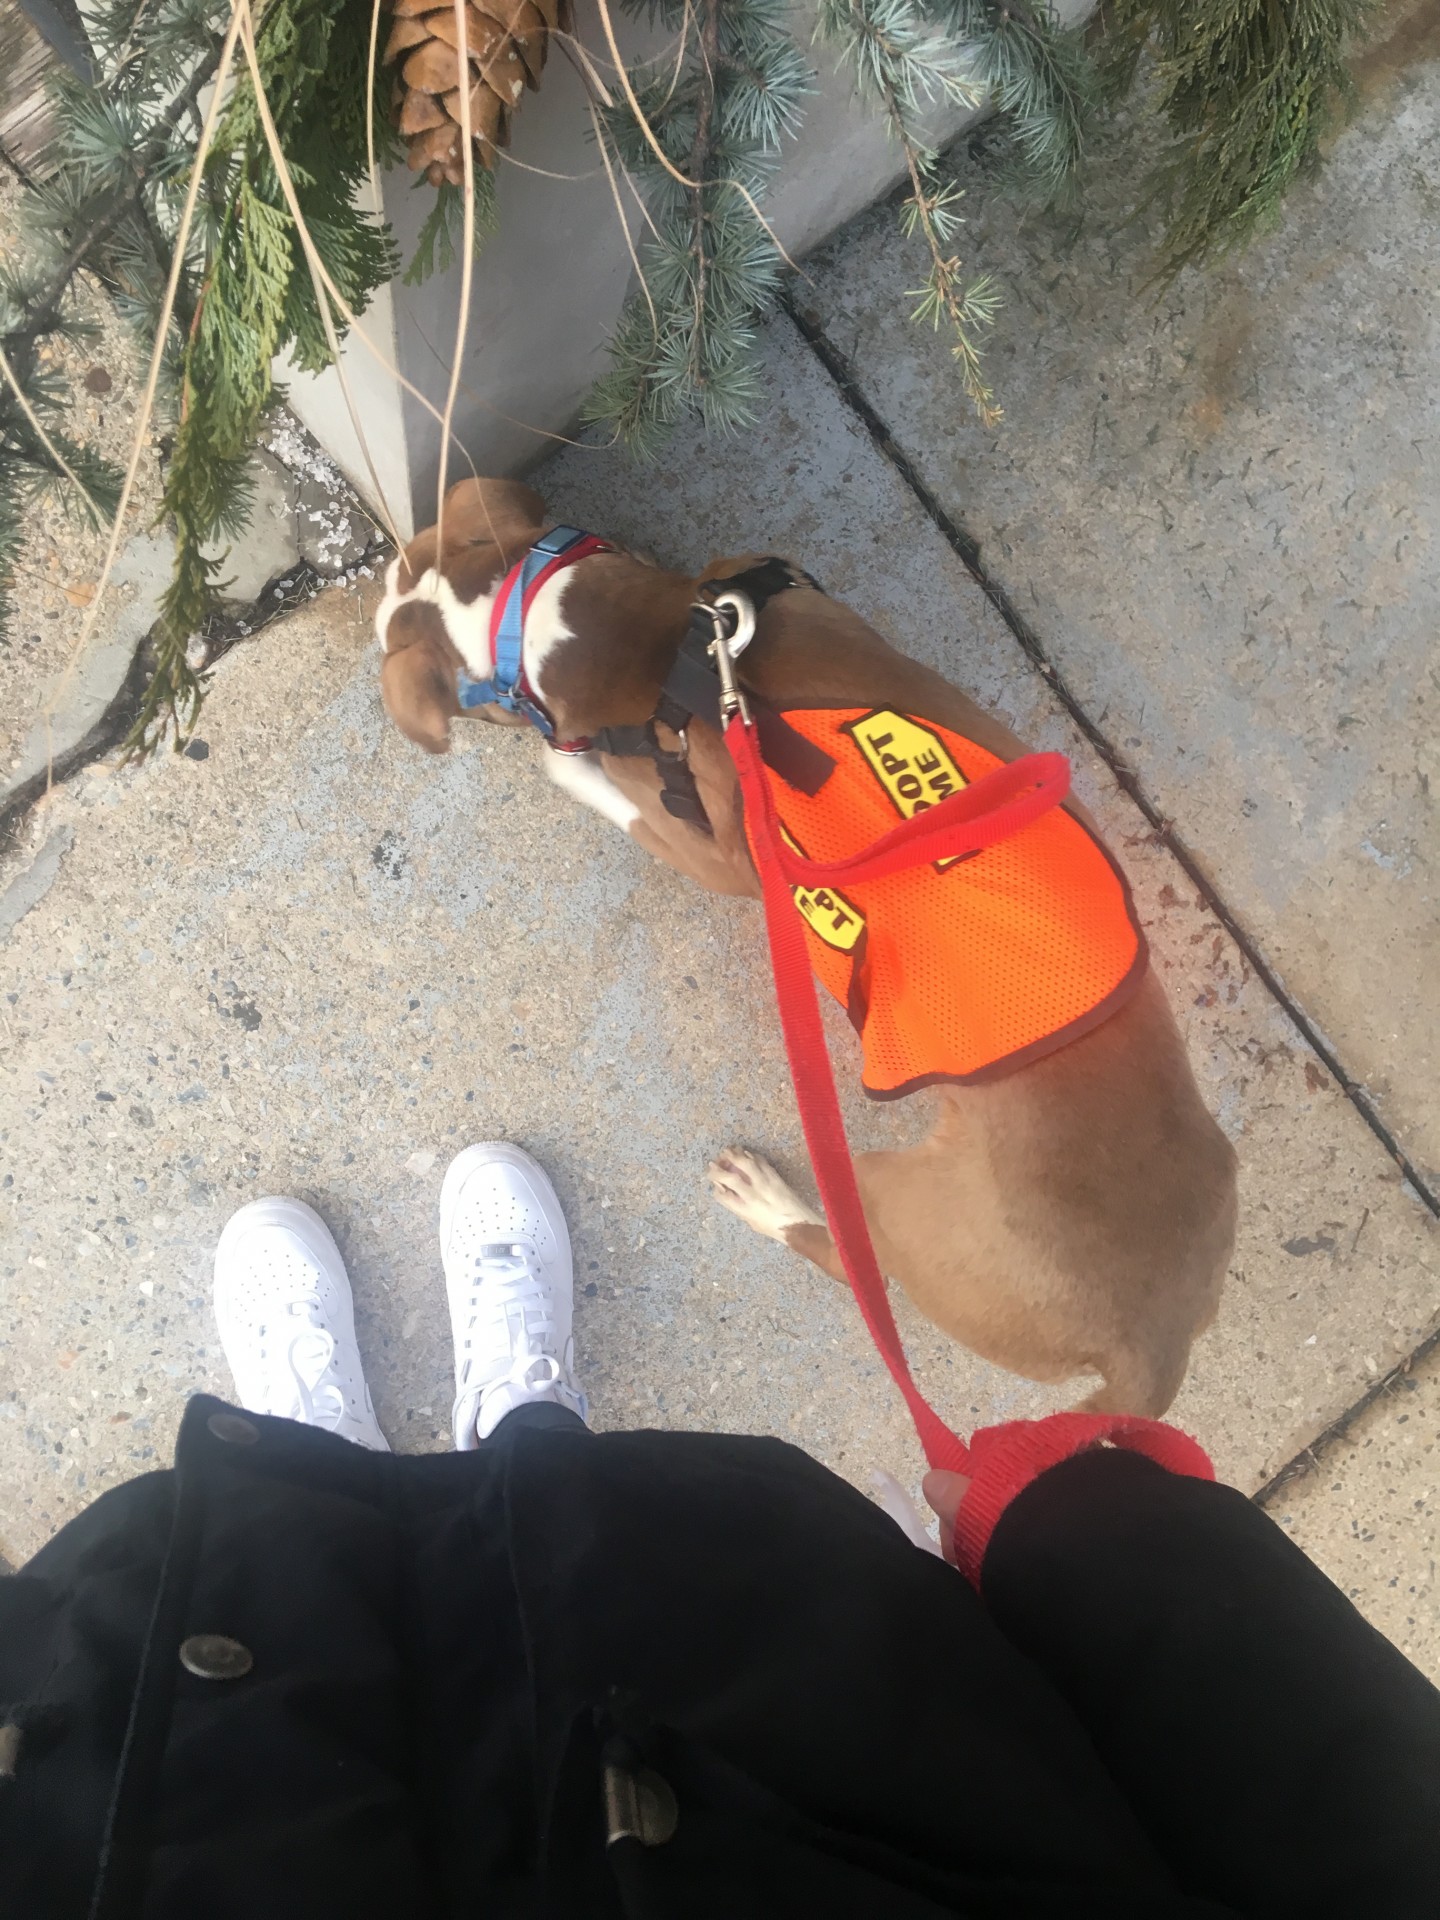 I walked dogs, they wore "adopt me" vests to attract people on the streets